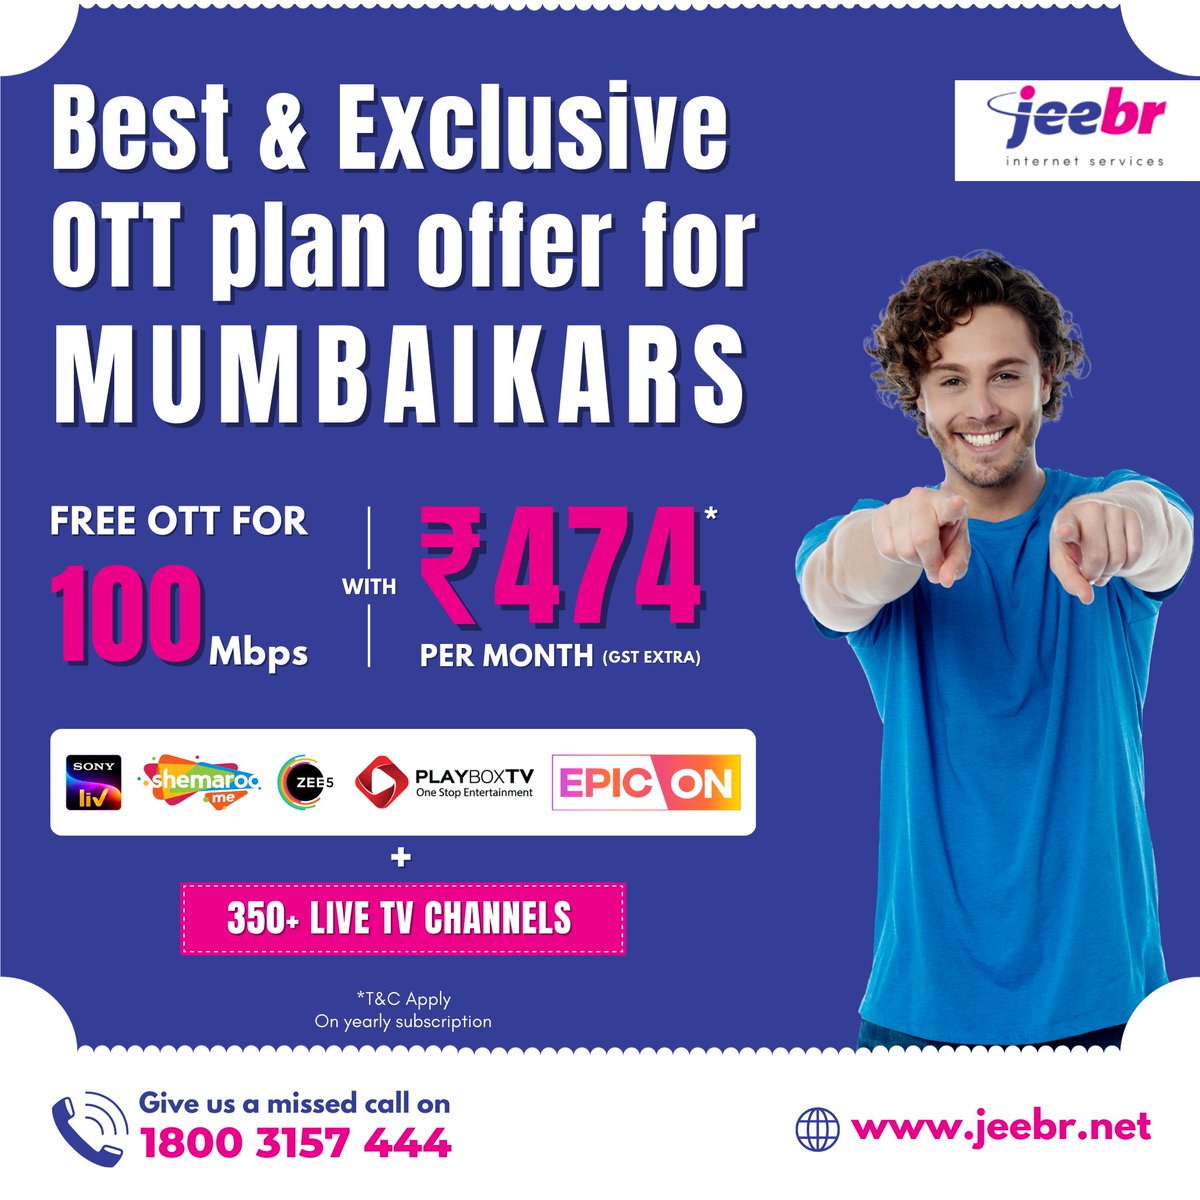 Hey Aamchi Mumbai....here's an exciting Jeebr OTT package for you all...grab now! Switch to Jeebr.😎
#jeebrinternetservices #MumbaiMeriJaan #OTT #offers #packages #entertainment #Enjoy #internetserviceprovider #happinessguaranteed #HappyFathersDay #customersupport #bestplatforms